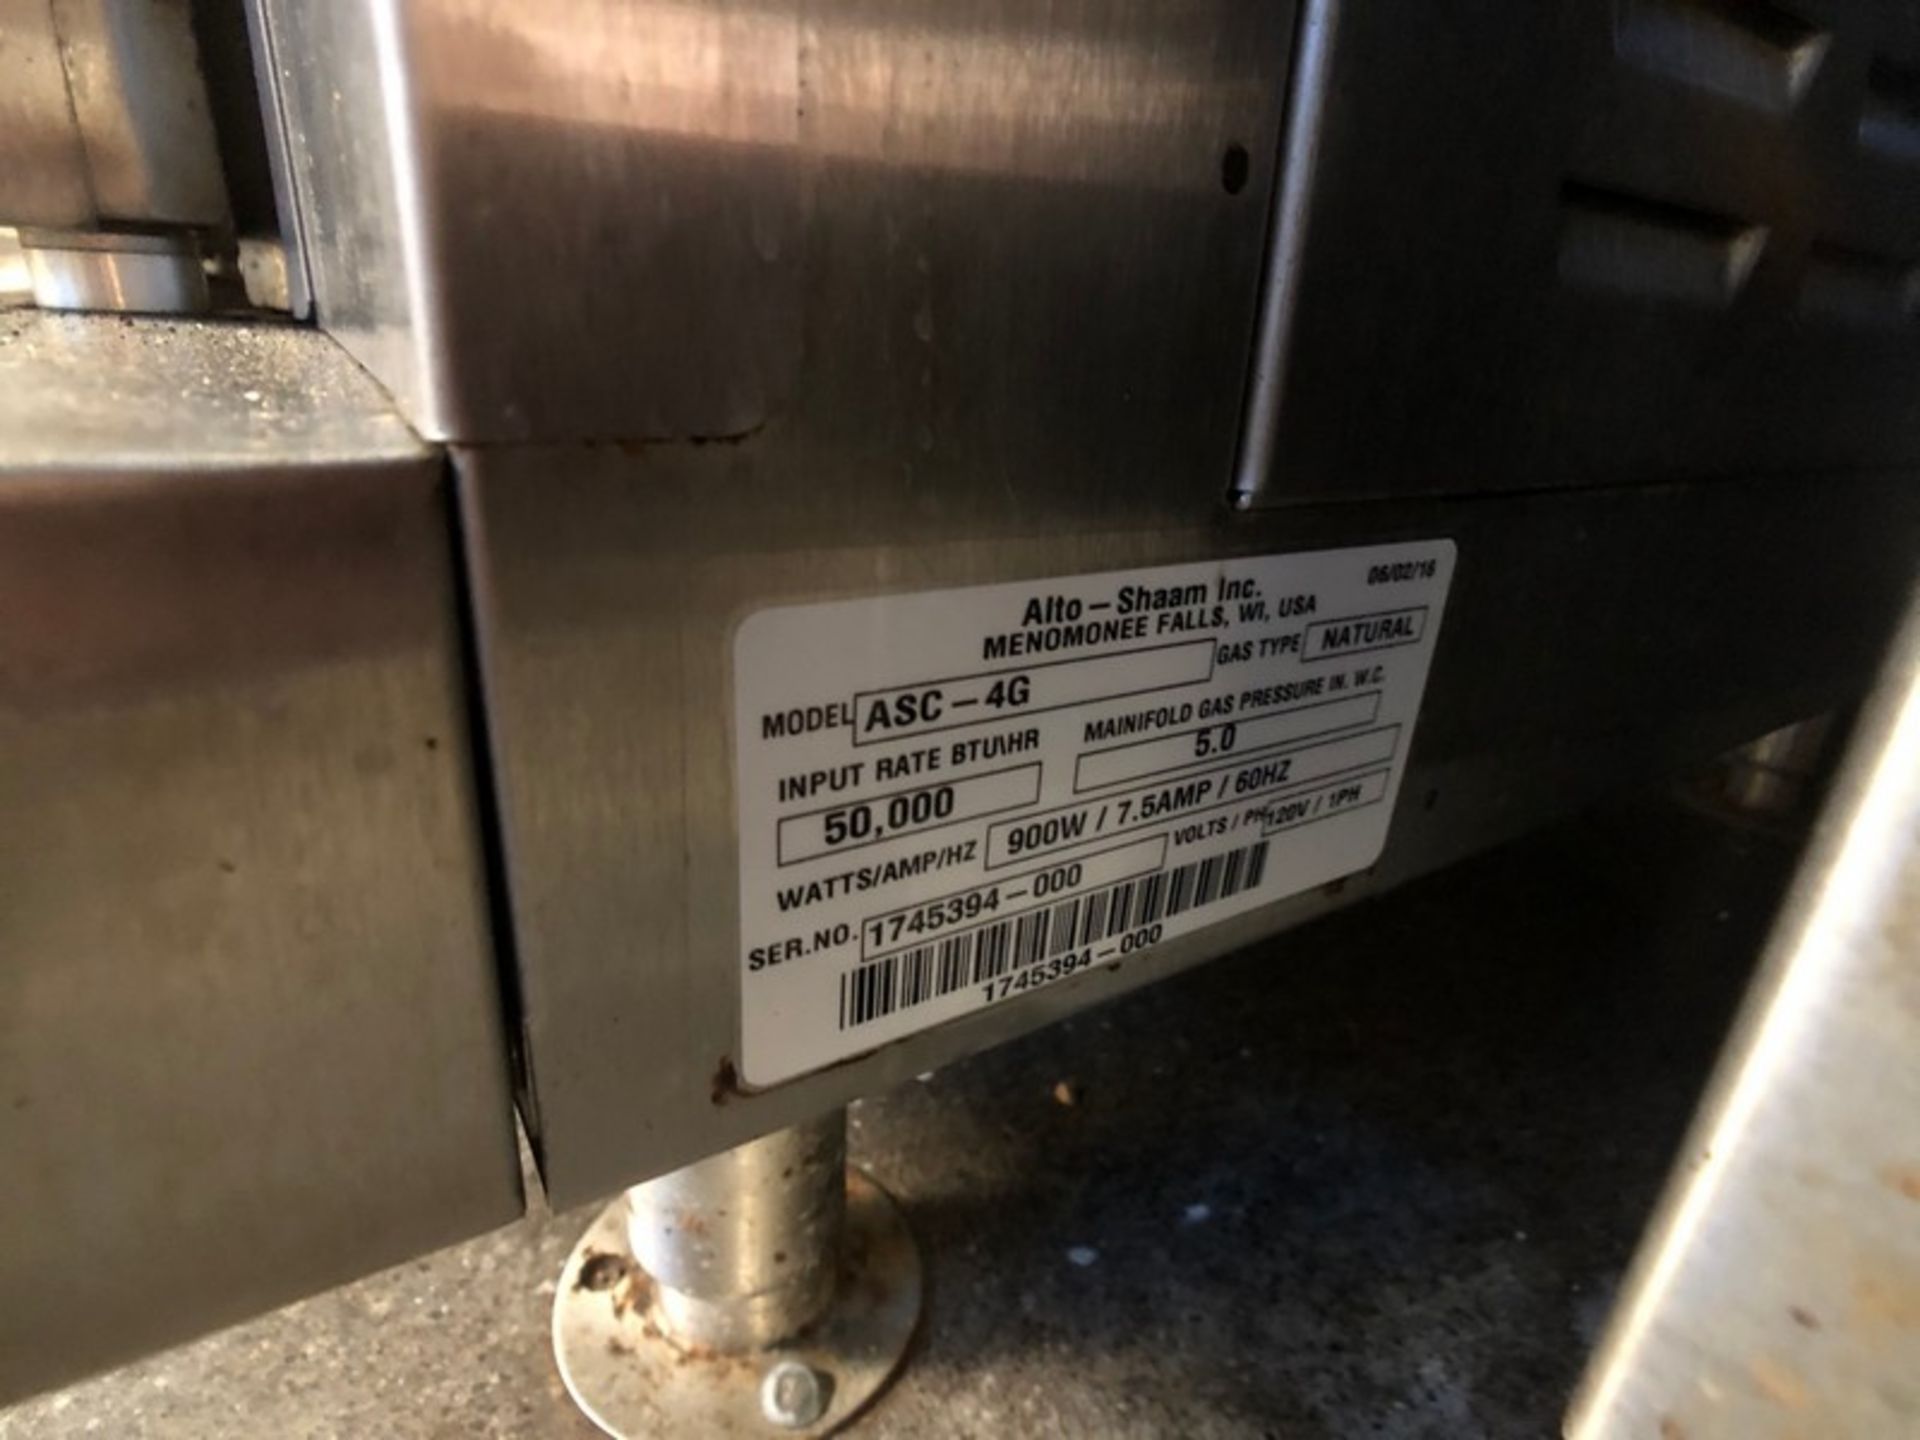 2016 ALTO-SHAM CONVECTION OVEN, MODEL ASC-4G, S/N1745394-000 (INV#74526)(Located @ the MDG Auction - Image 2 of 5